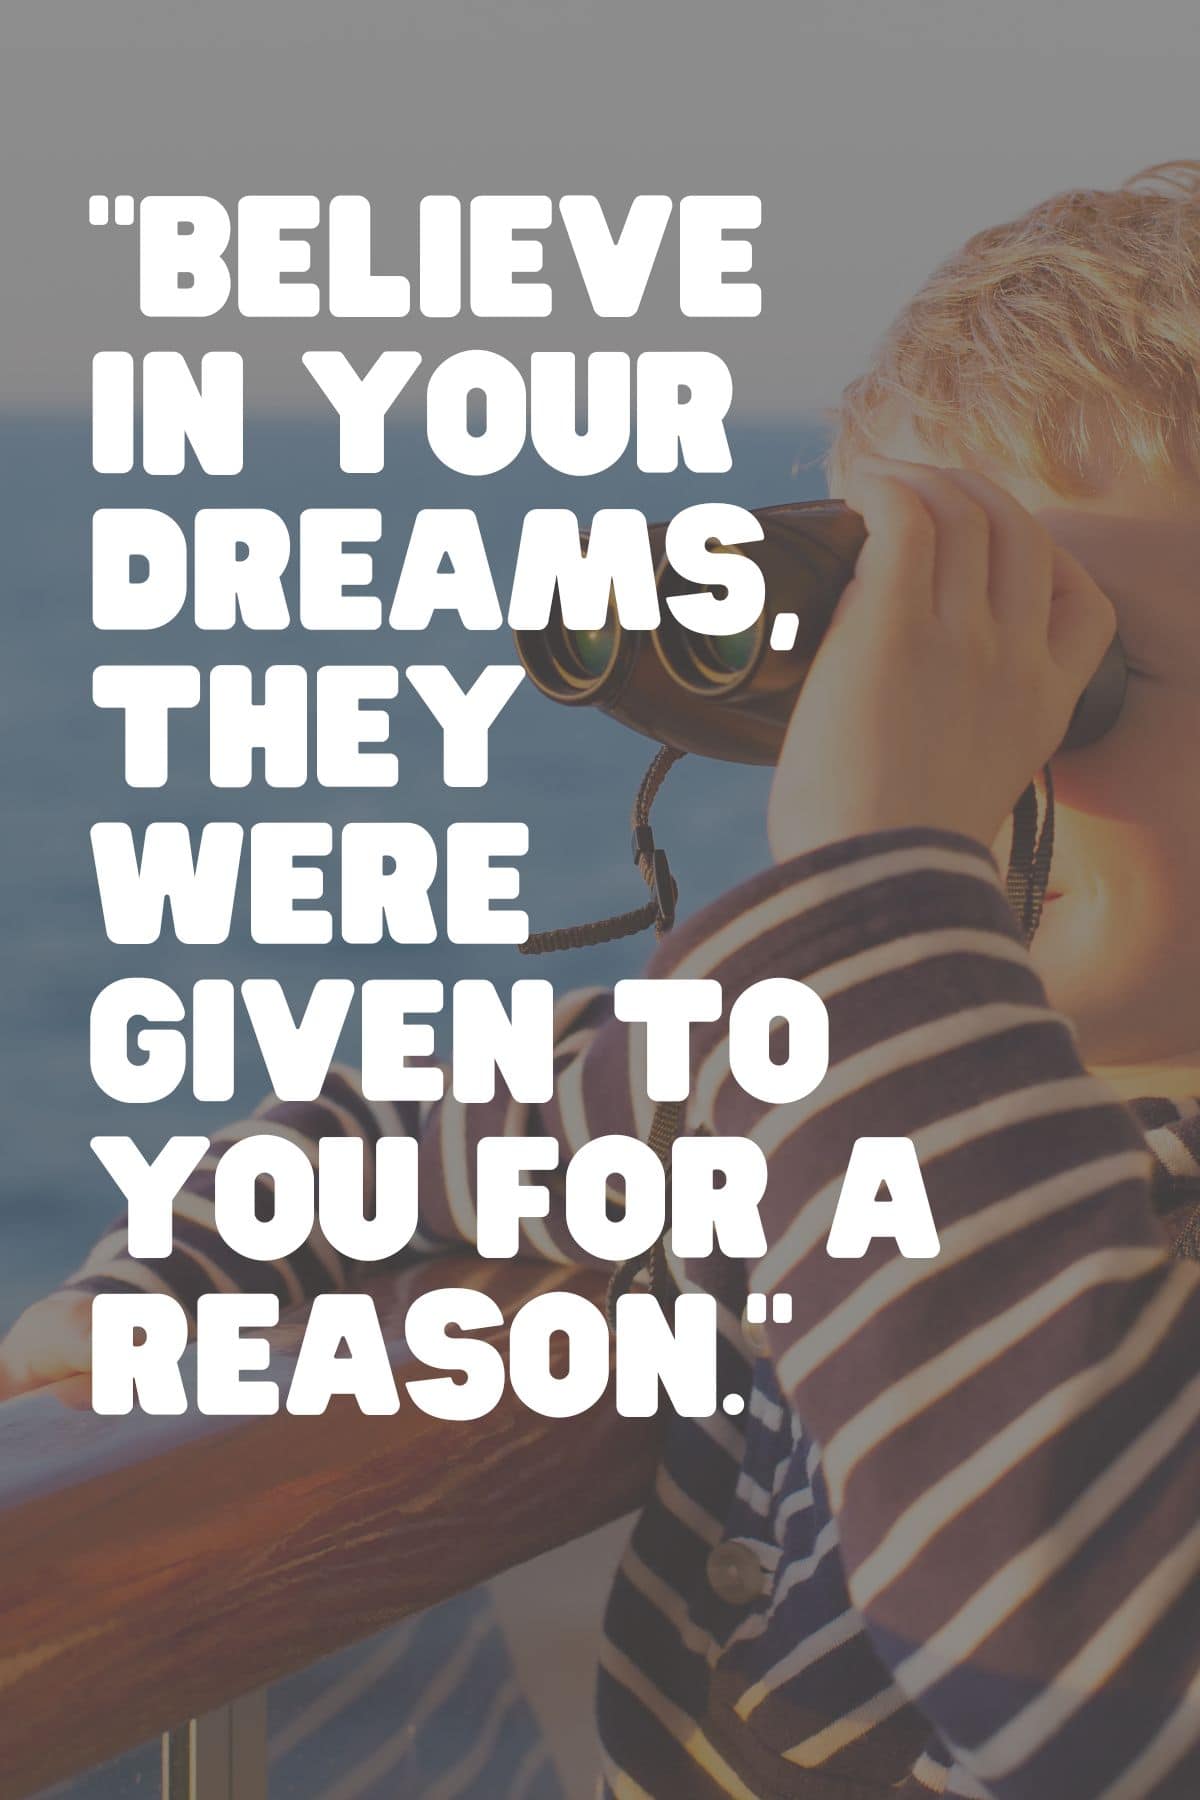 "Believe in your dreams, they were given to you for a reason." - Katrina Mayer confidence quotes